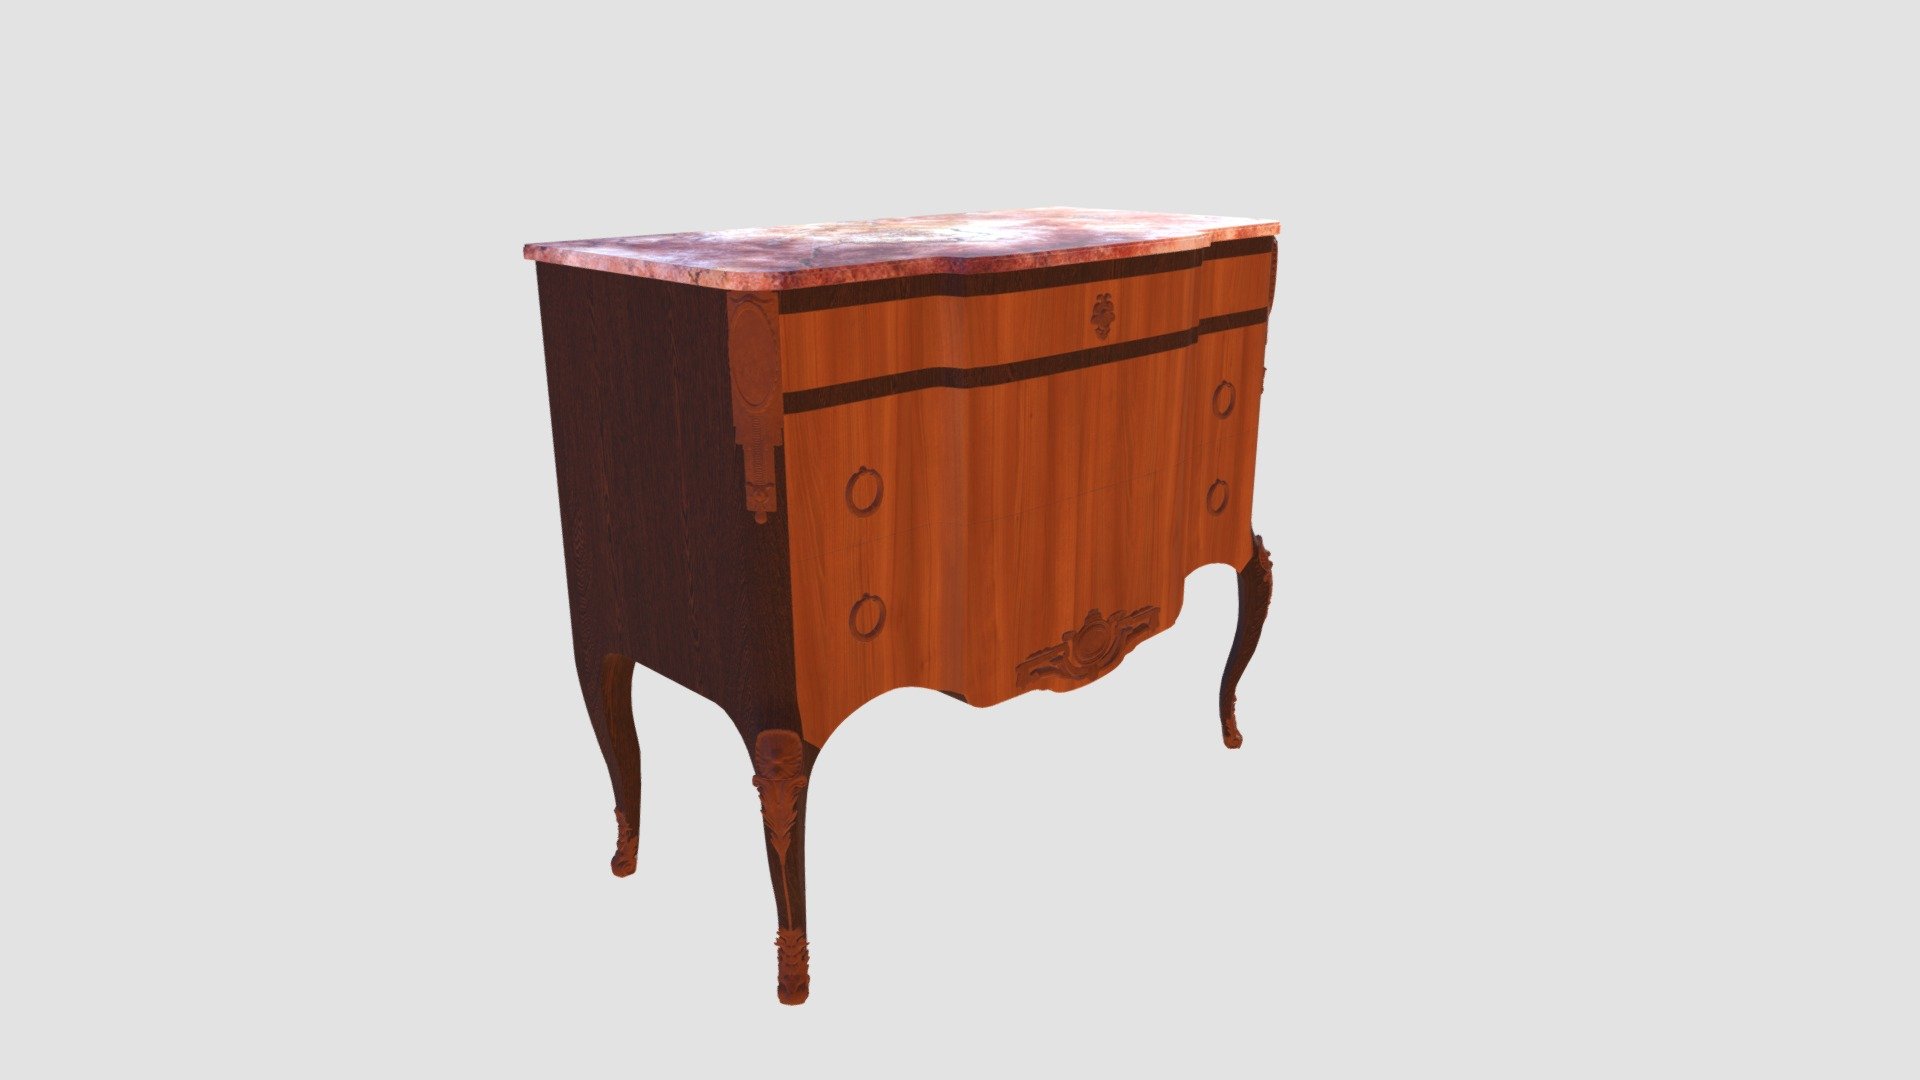 Highly detailed 3d model of antique furniture with all textures, shaders and materials. It is ready to use, just put it into your scene 3d model